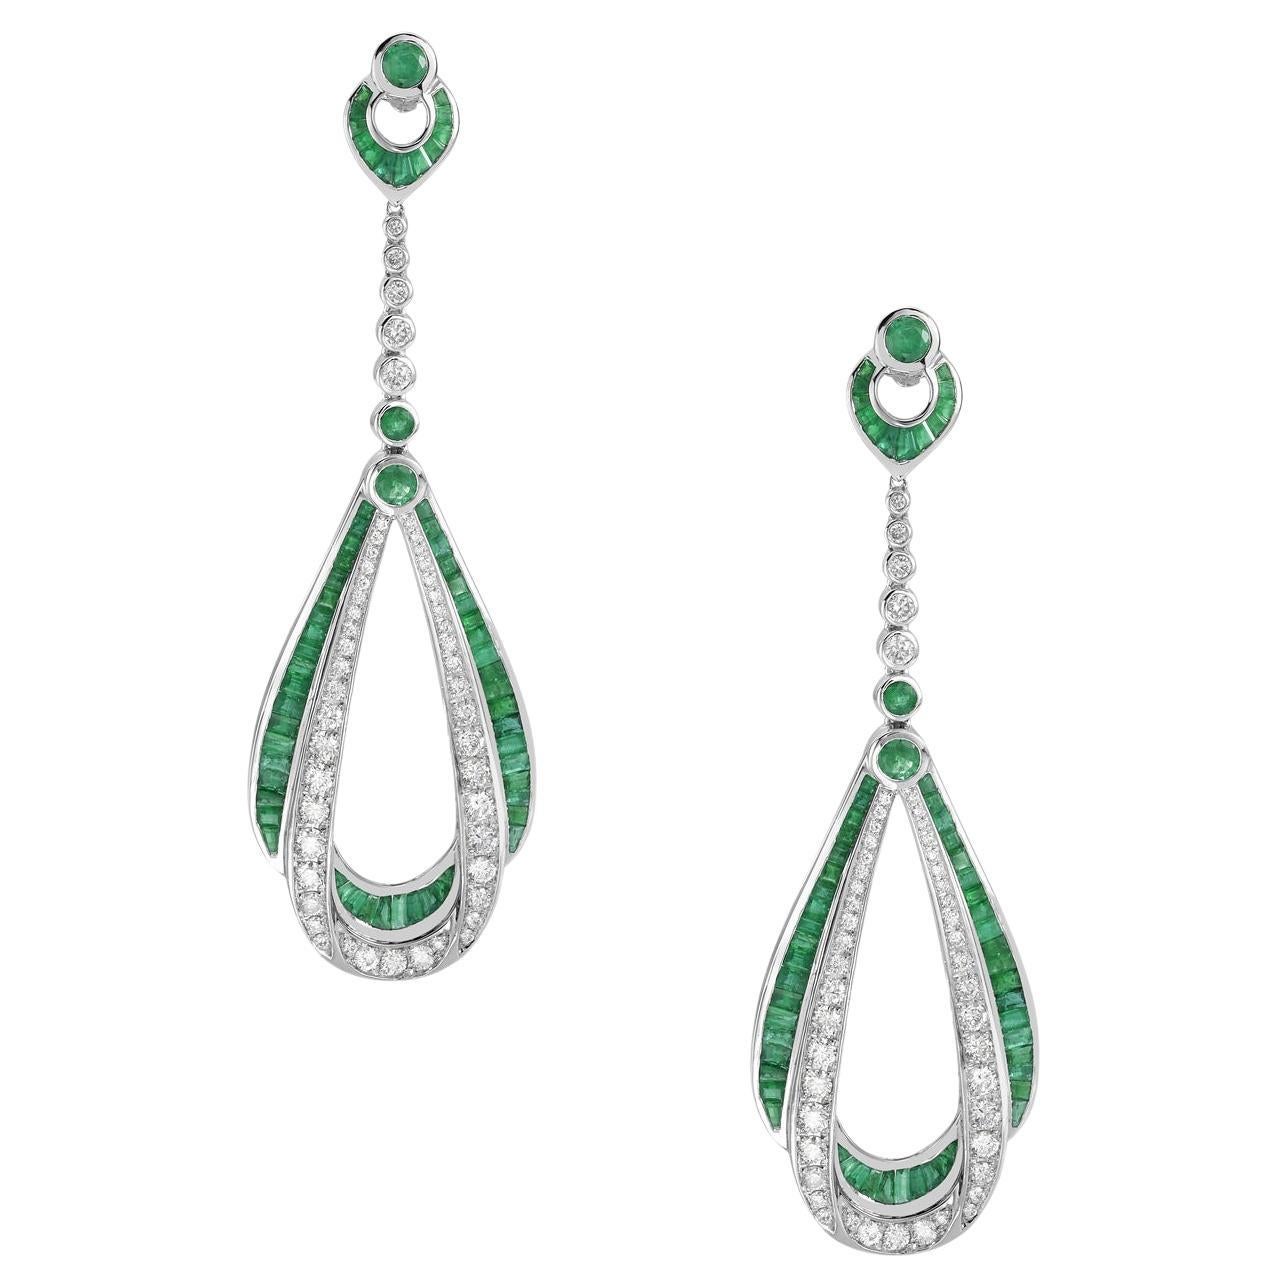 5.06 Ct Emerald & Diamond Dangle Earrings Made In 18k White Gold For Sale